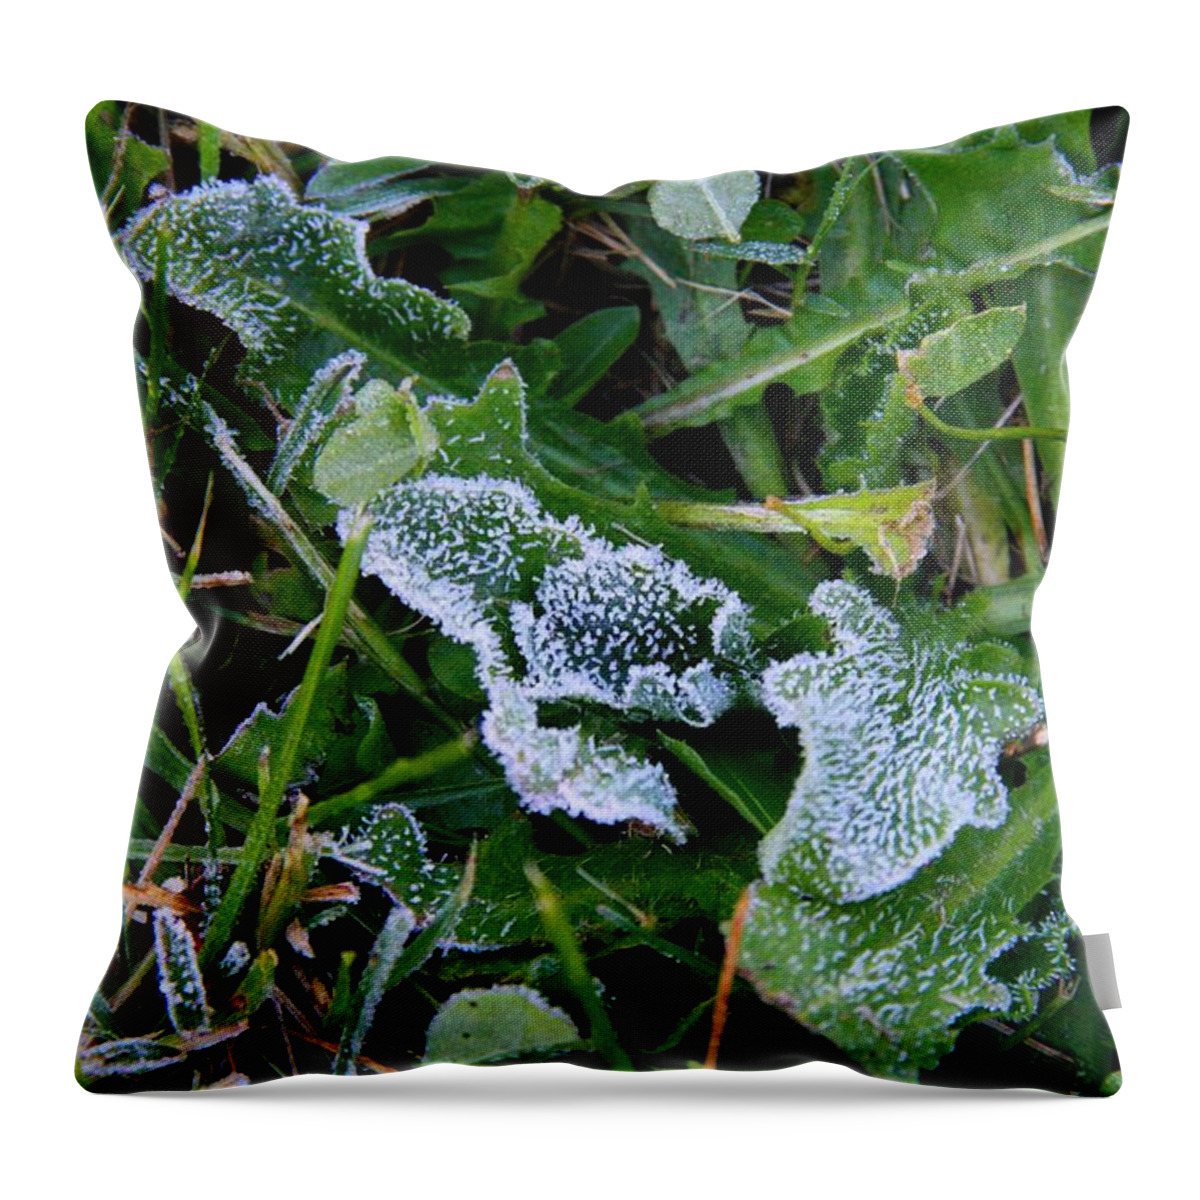 Frost Throw Pillow featuring the photograph Frost by Kathryn Meyer